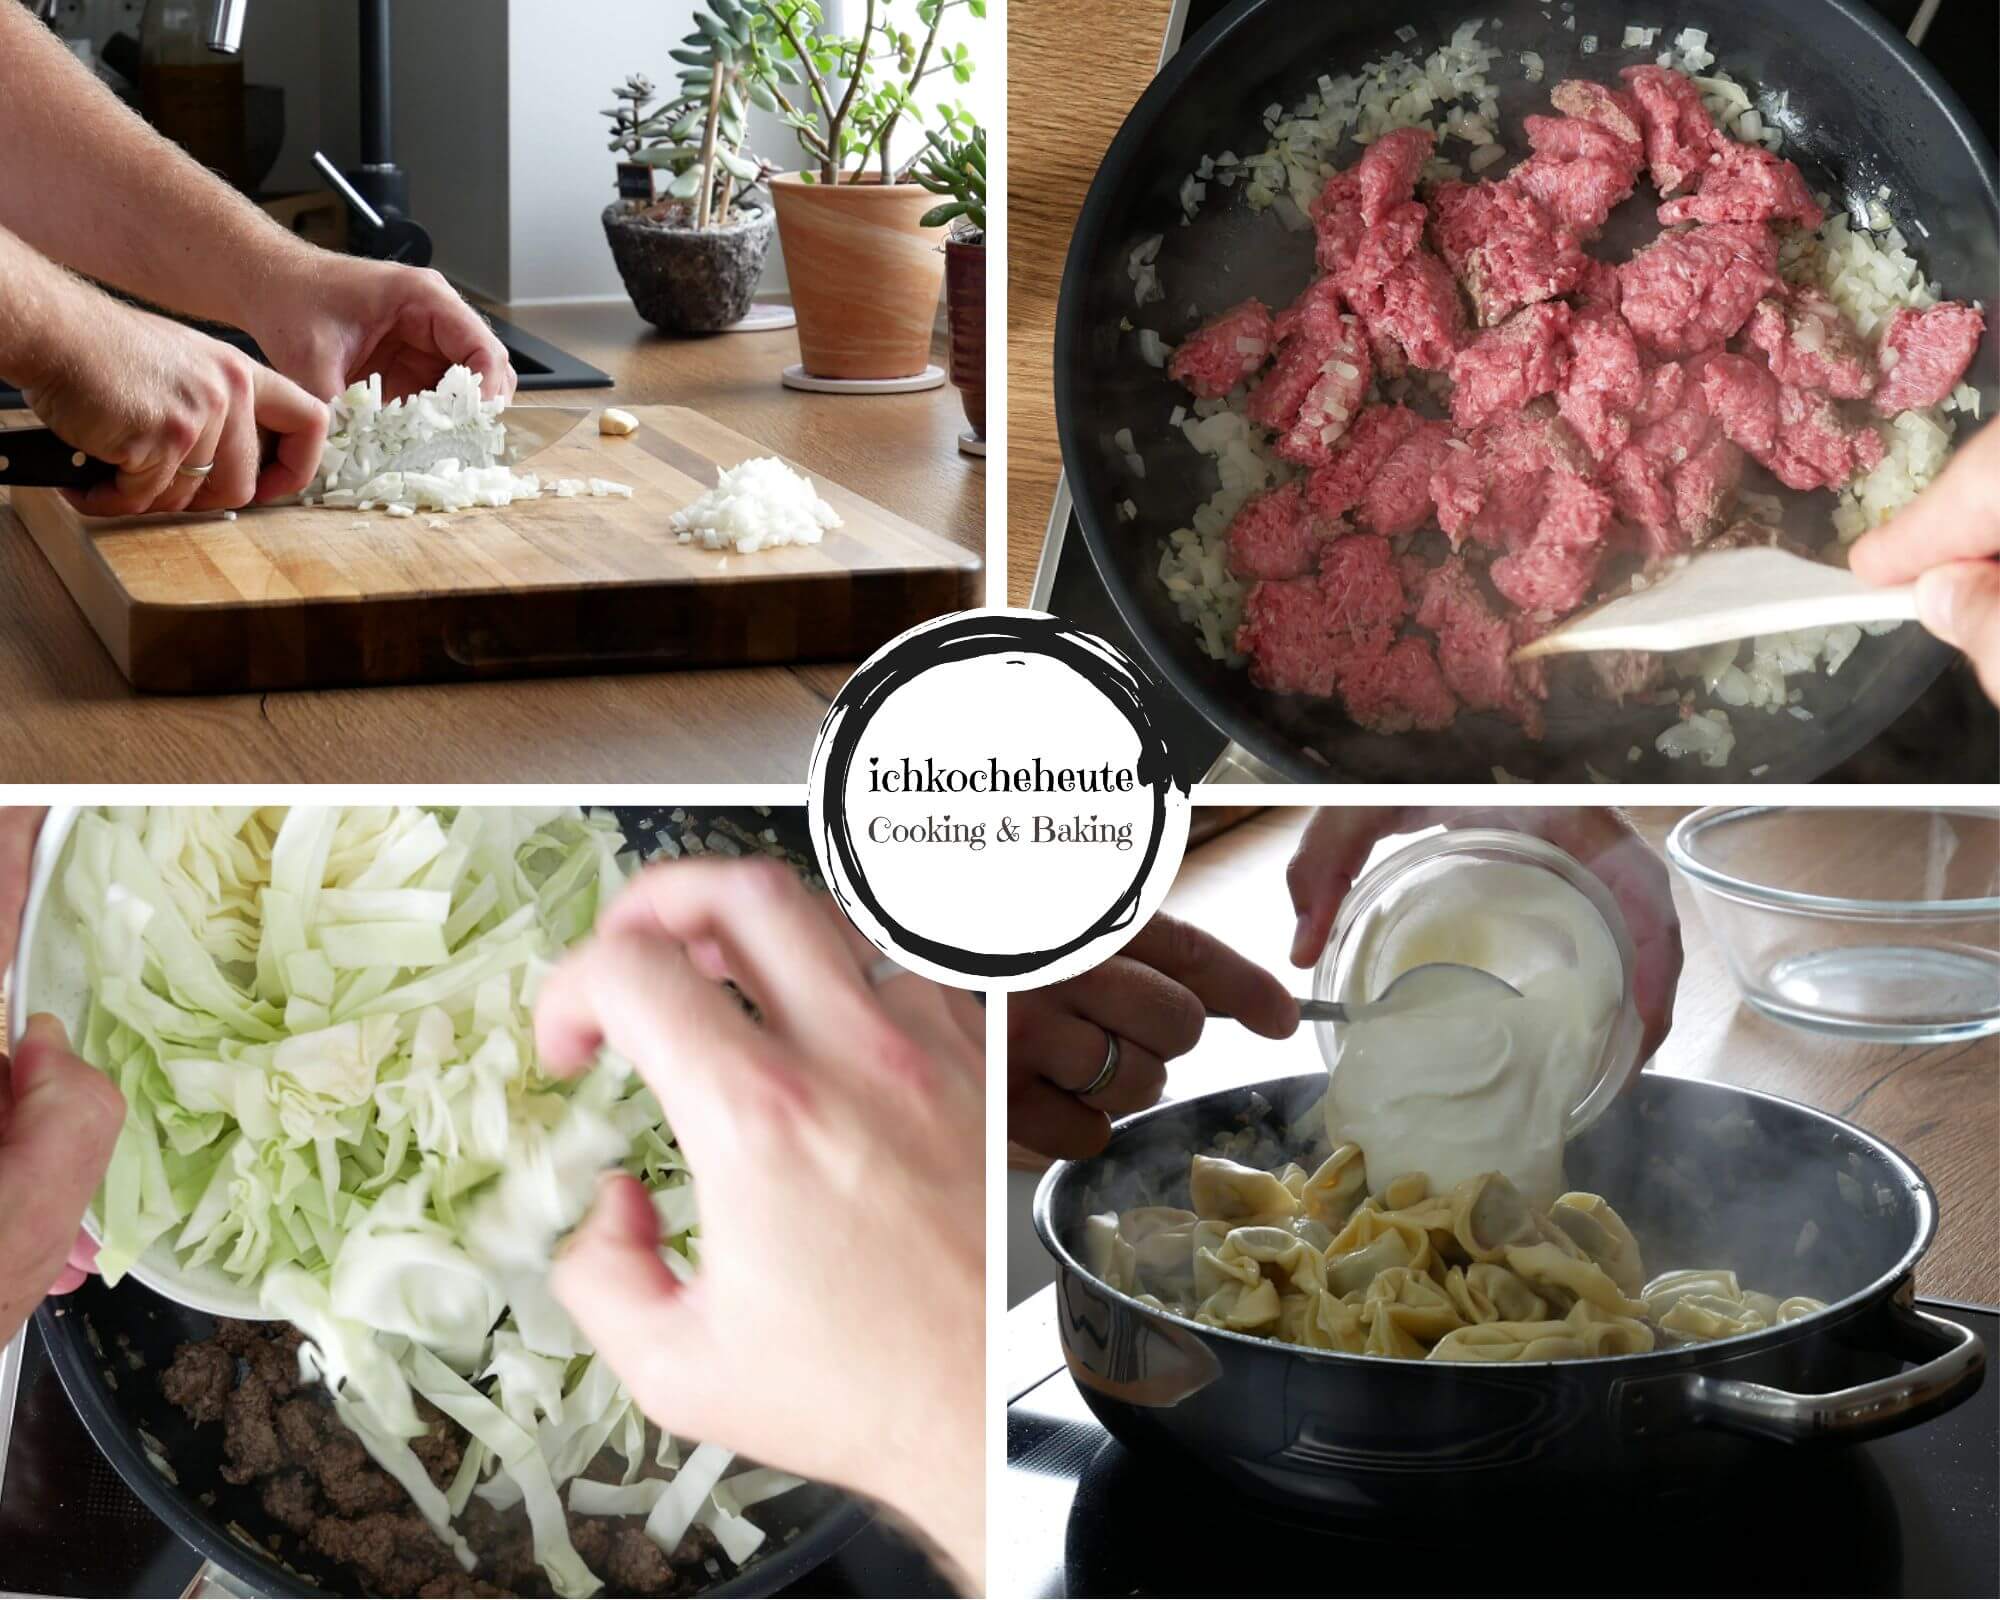 Preparations for Simple Tortellini Stir-Fry with Pointed Cabbage & Ground Beef